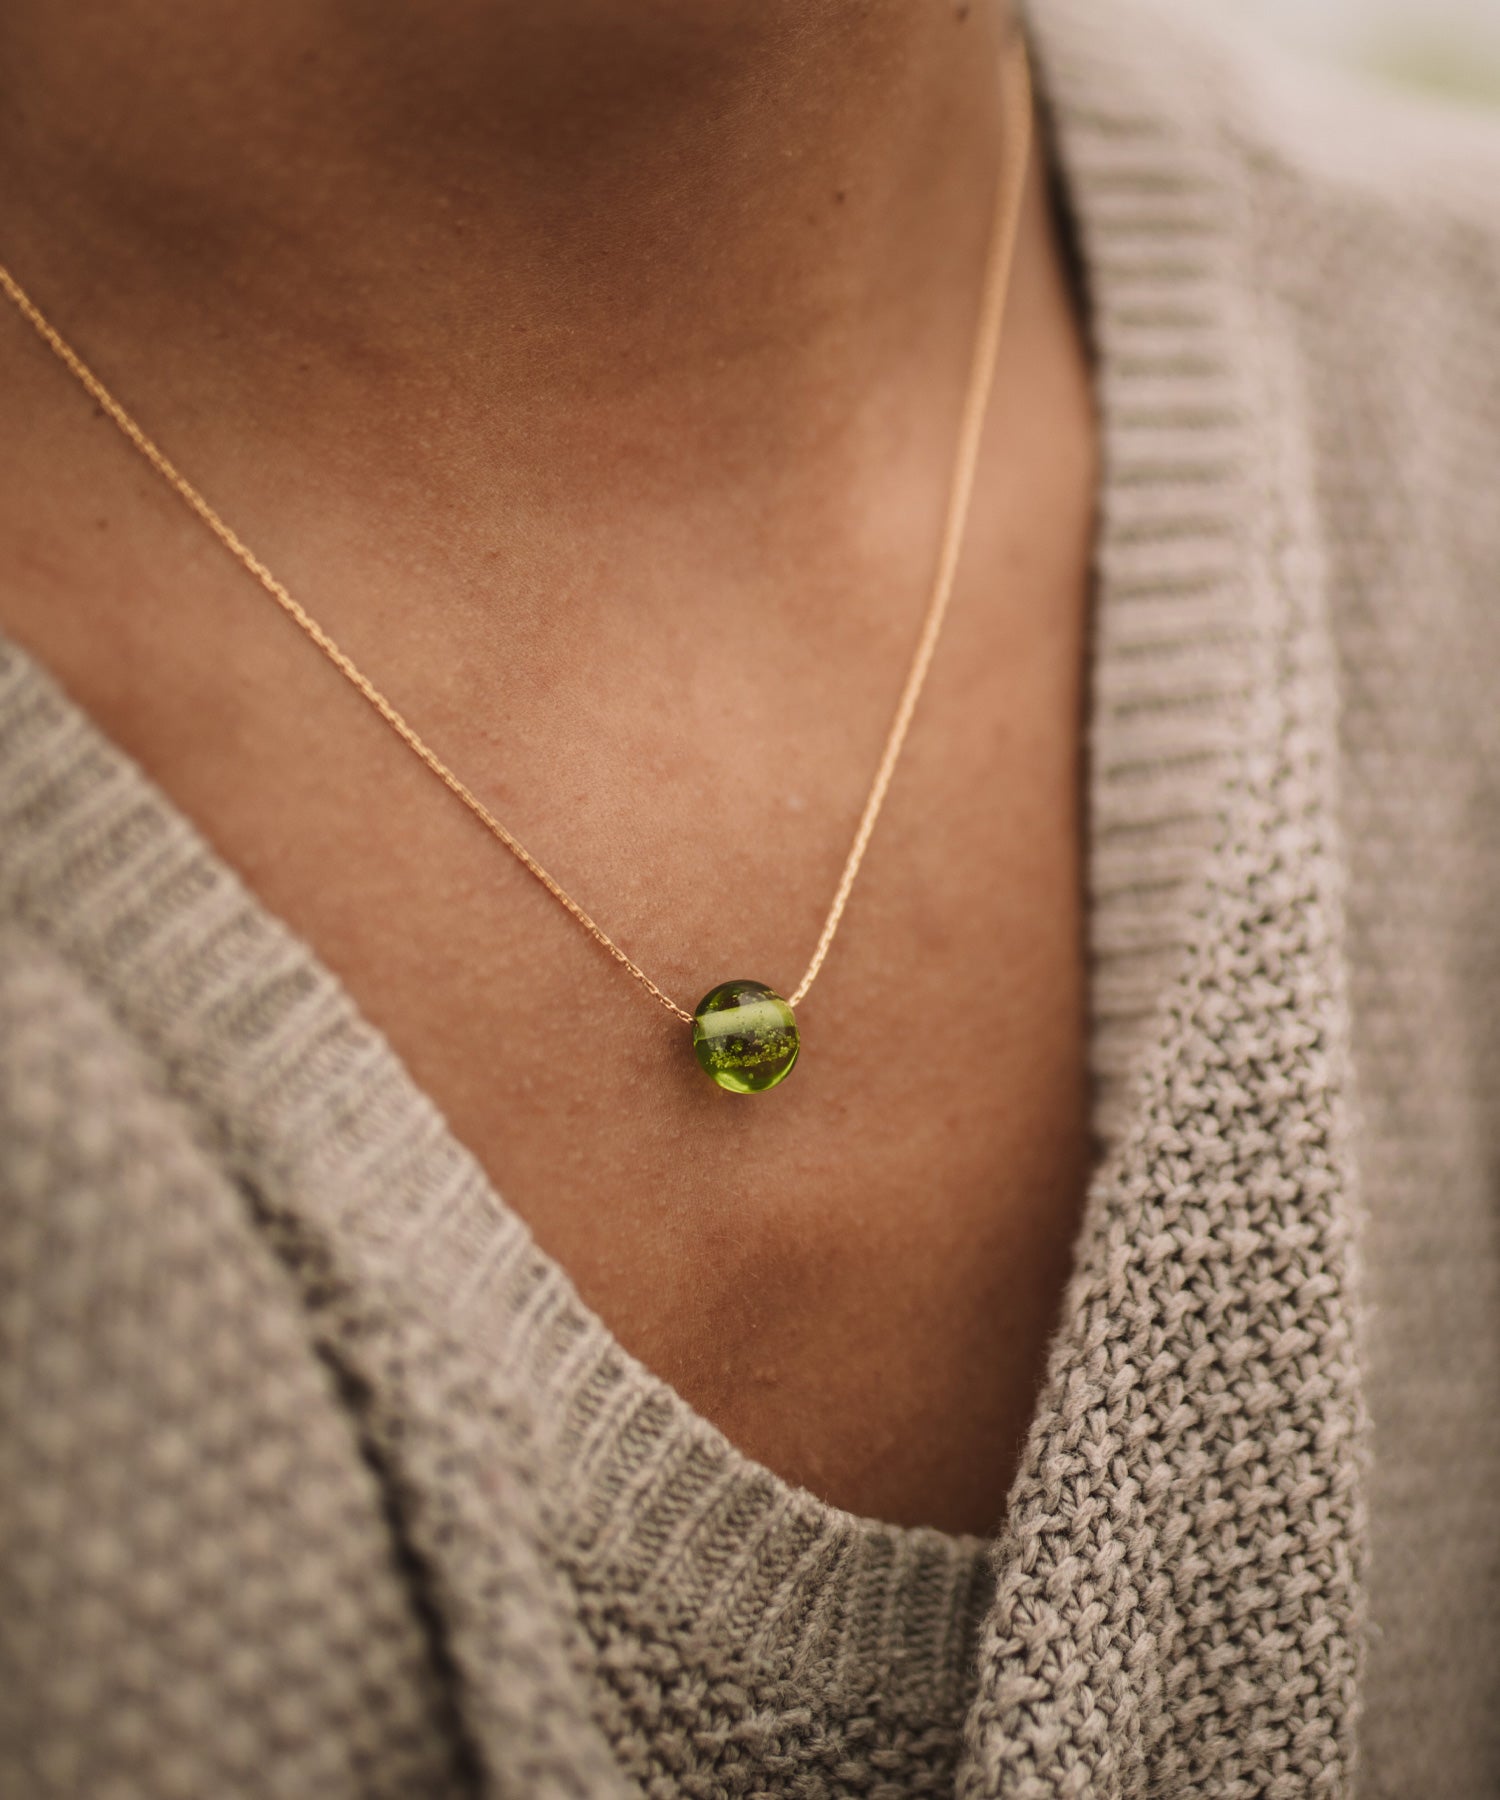 Green sand pebble on gold chain necklace.